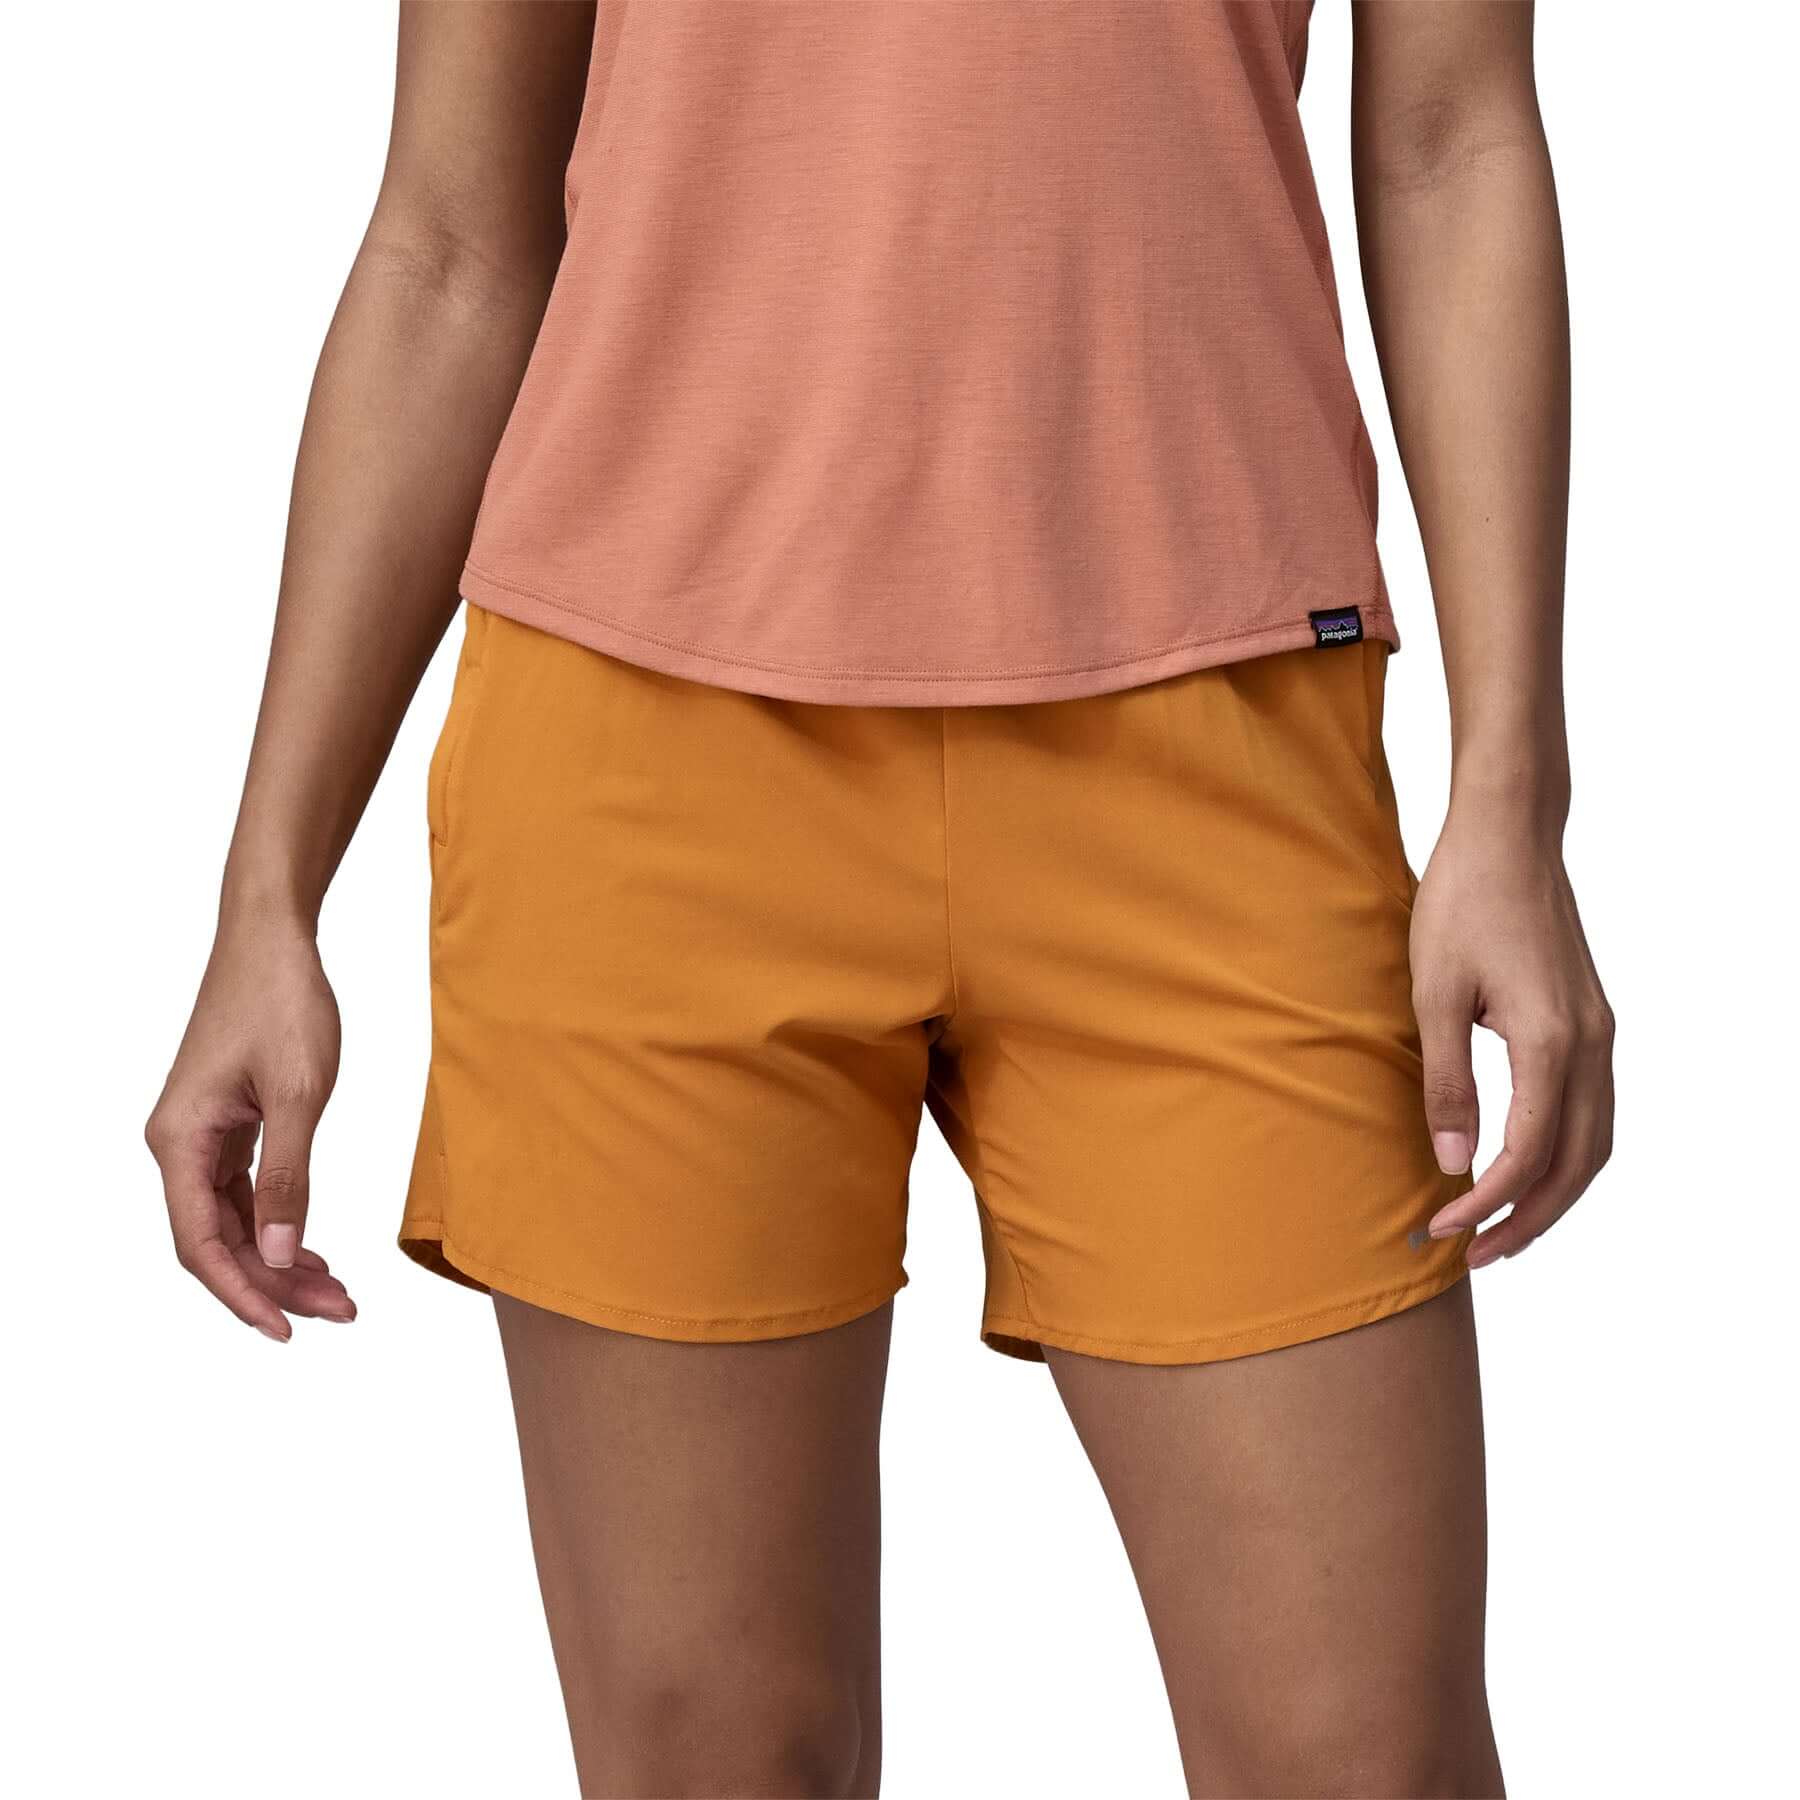 Women's Multi Trails Shorts - 5 1/2 in. in Golden Caramel | Patagonia Bend